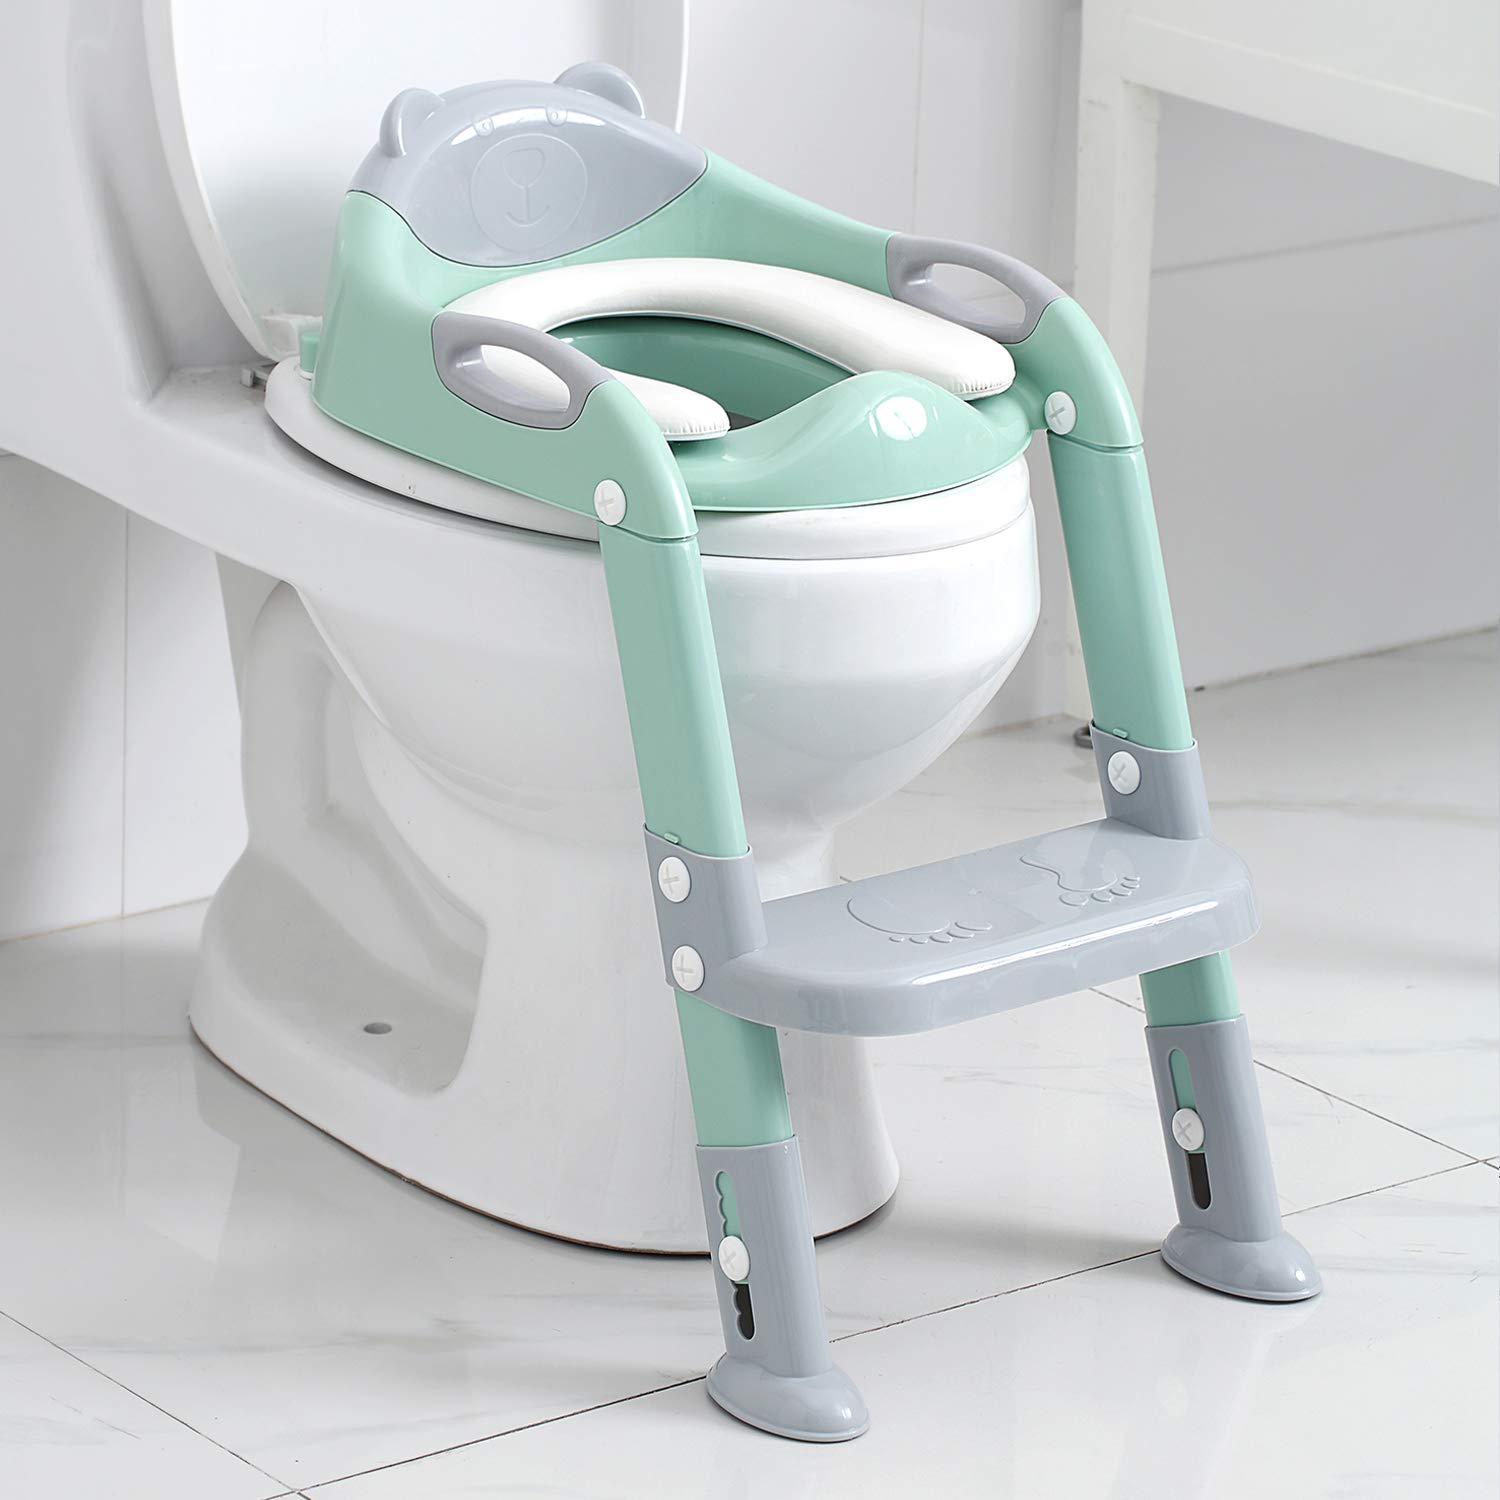 toilet seat baby safety Baby seat potty toilet safety description adult eco friendly plastic chair